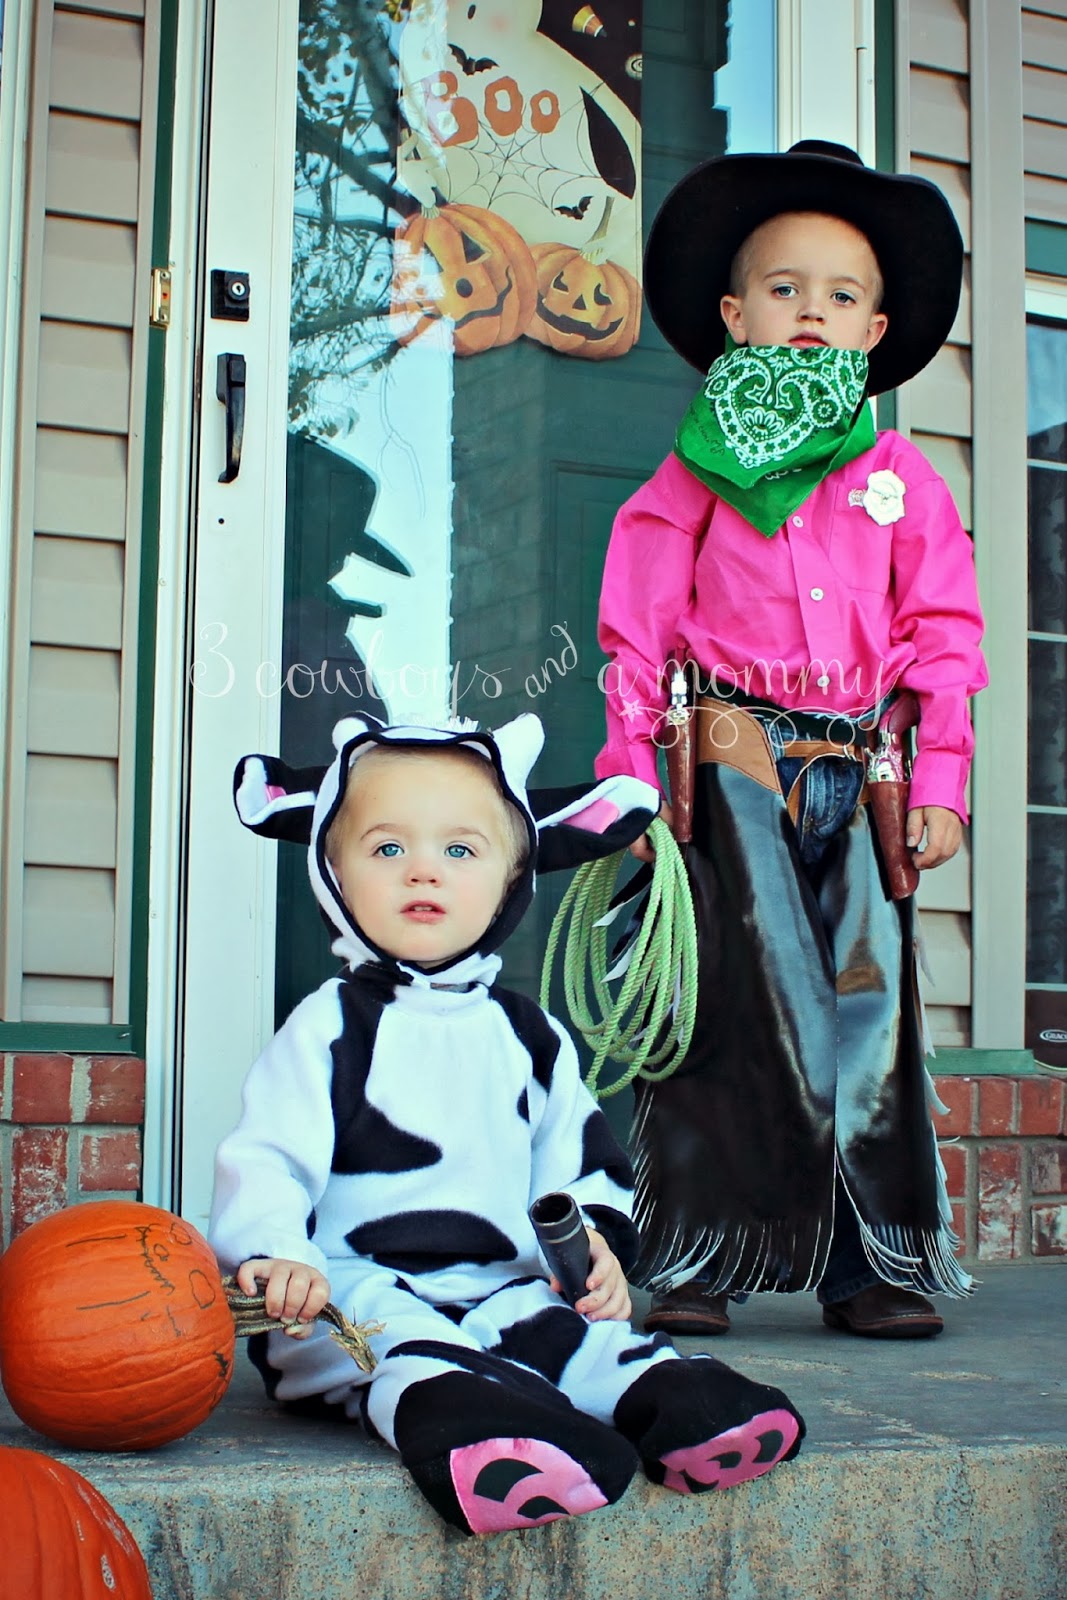 3 Cowboys and a mommy: Happy Halloween